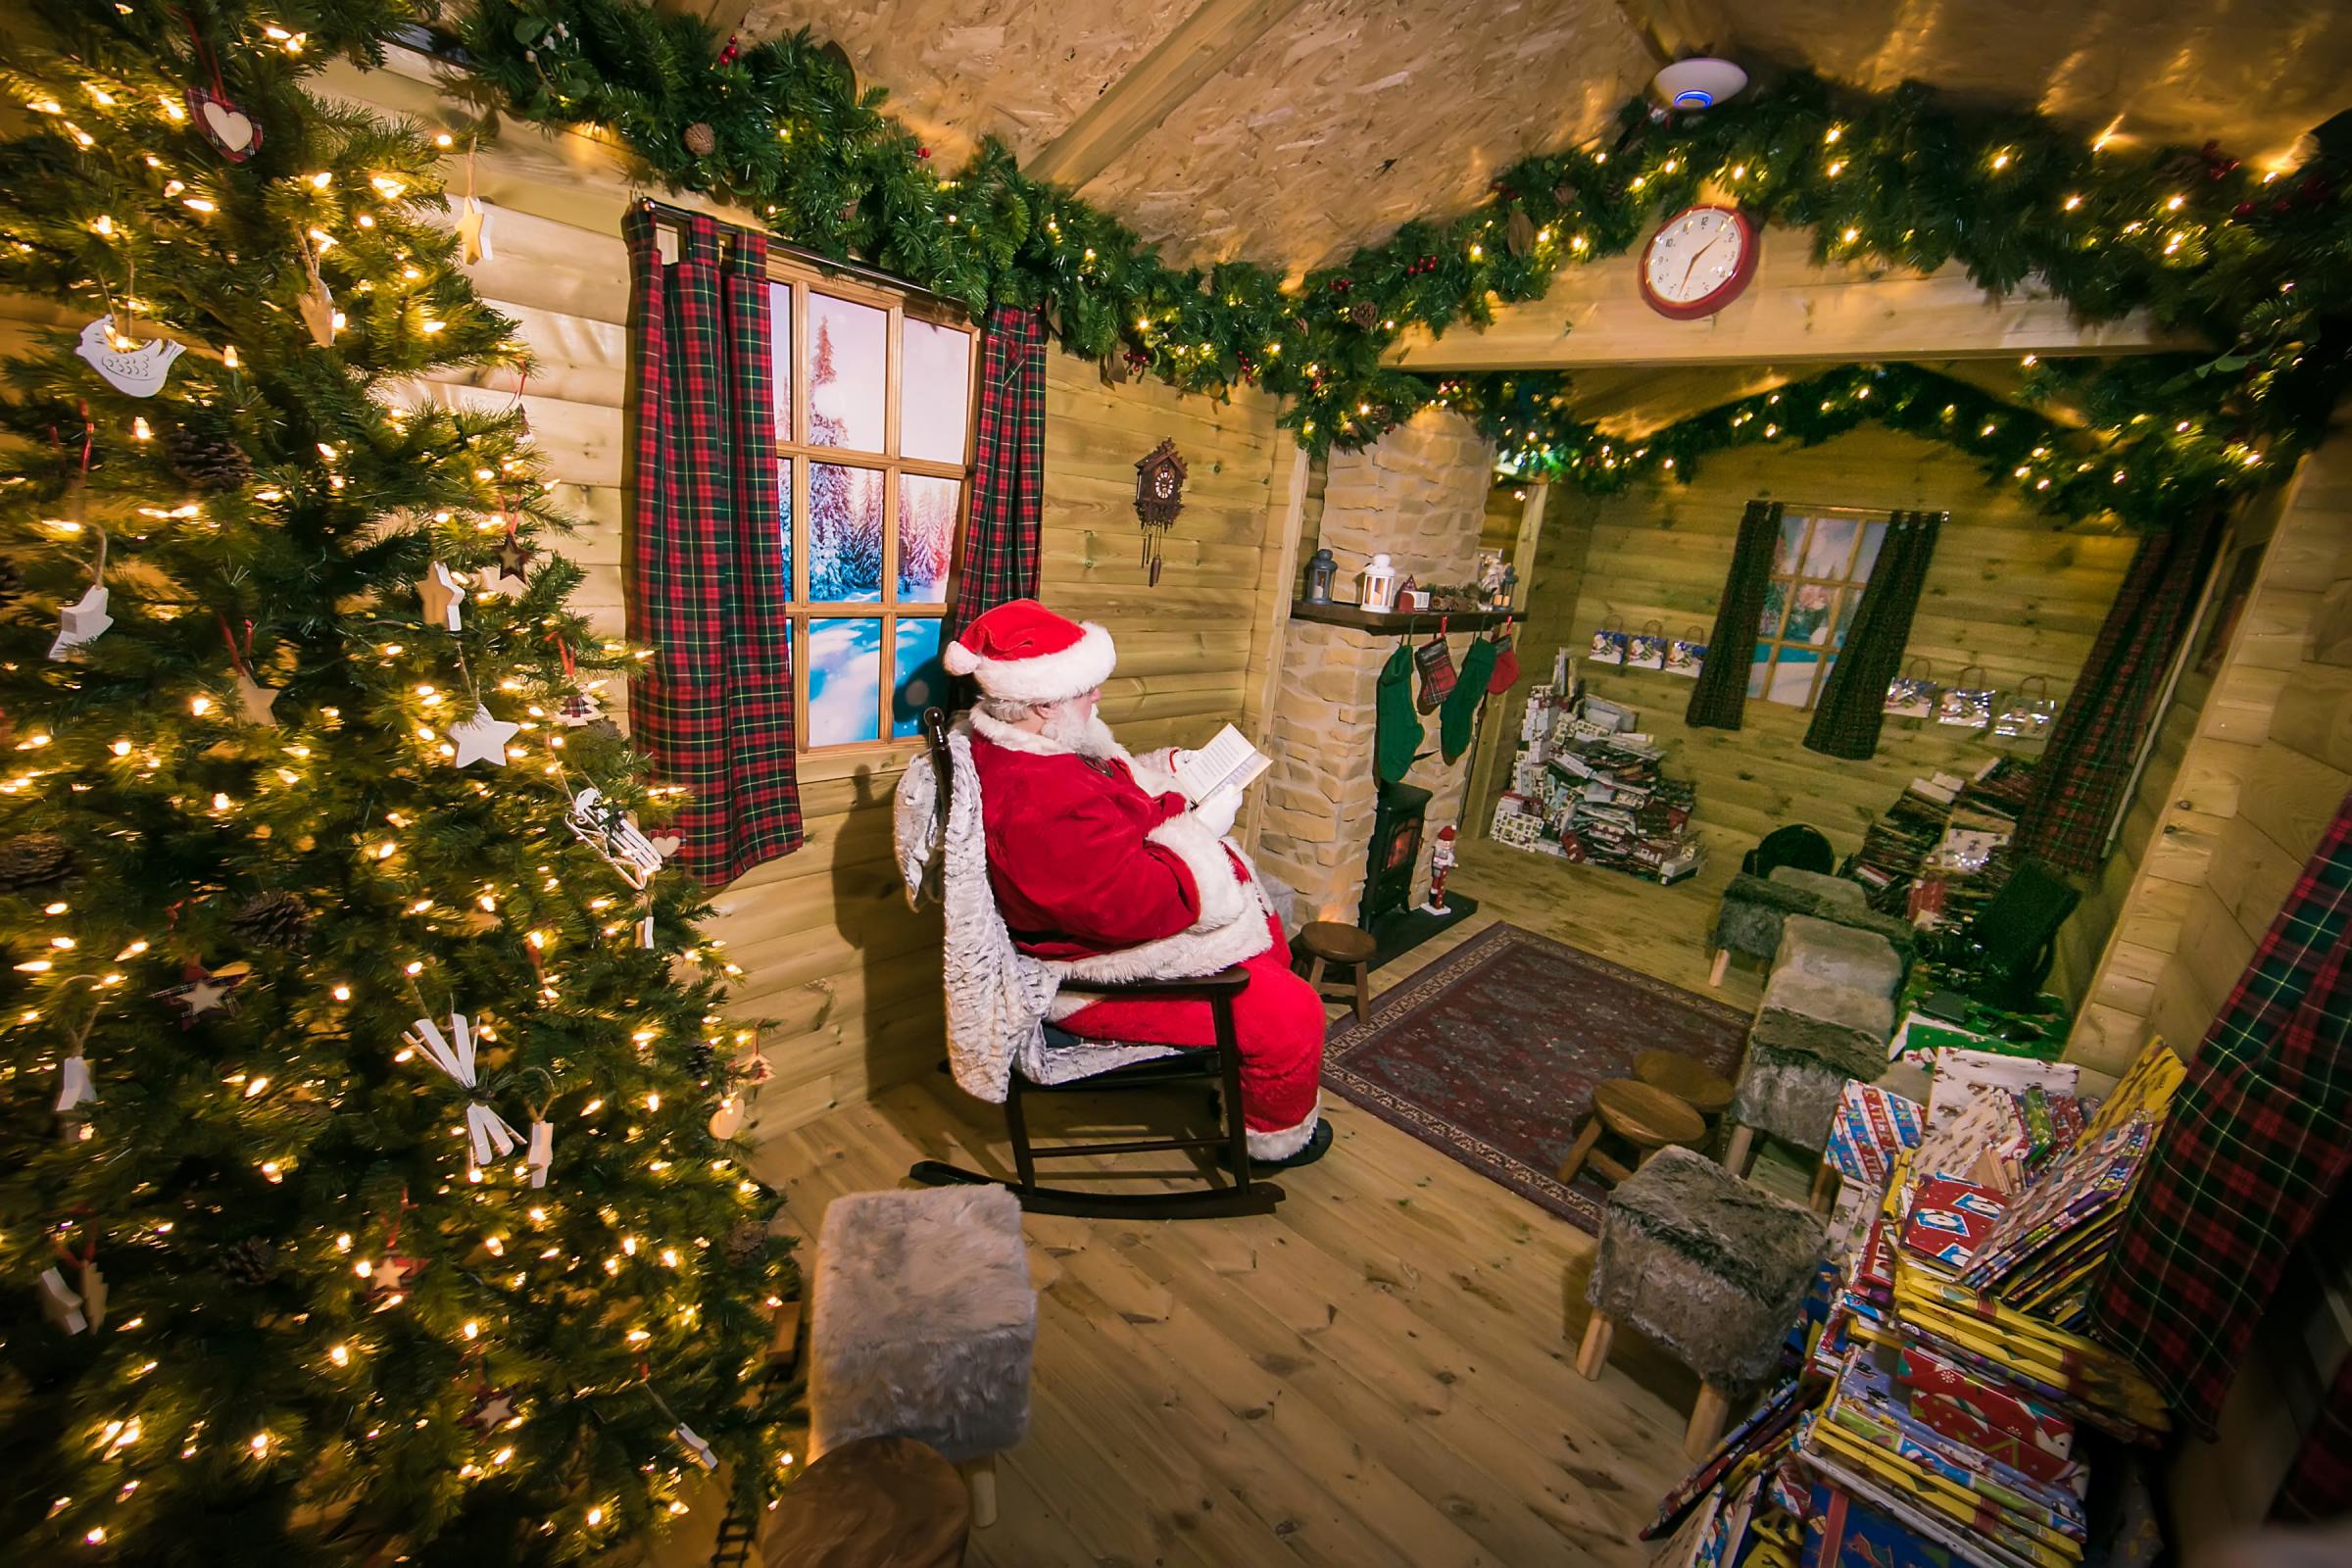 Real snow Santa's grotto at Chill Factore – here's how to get tickets